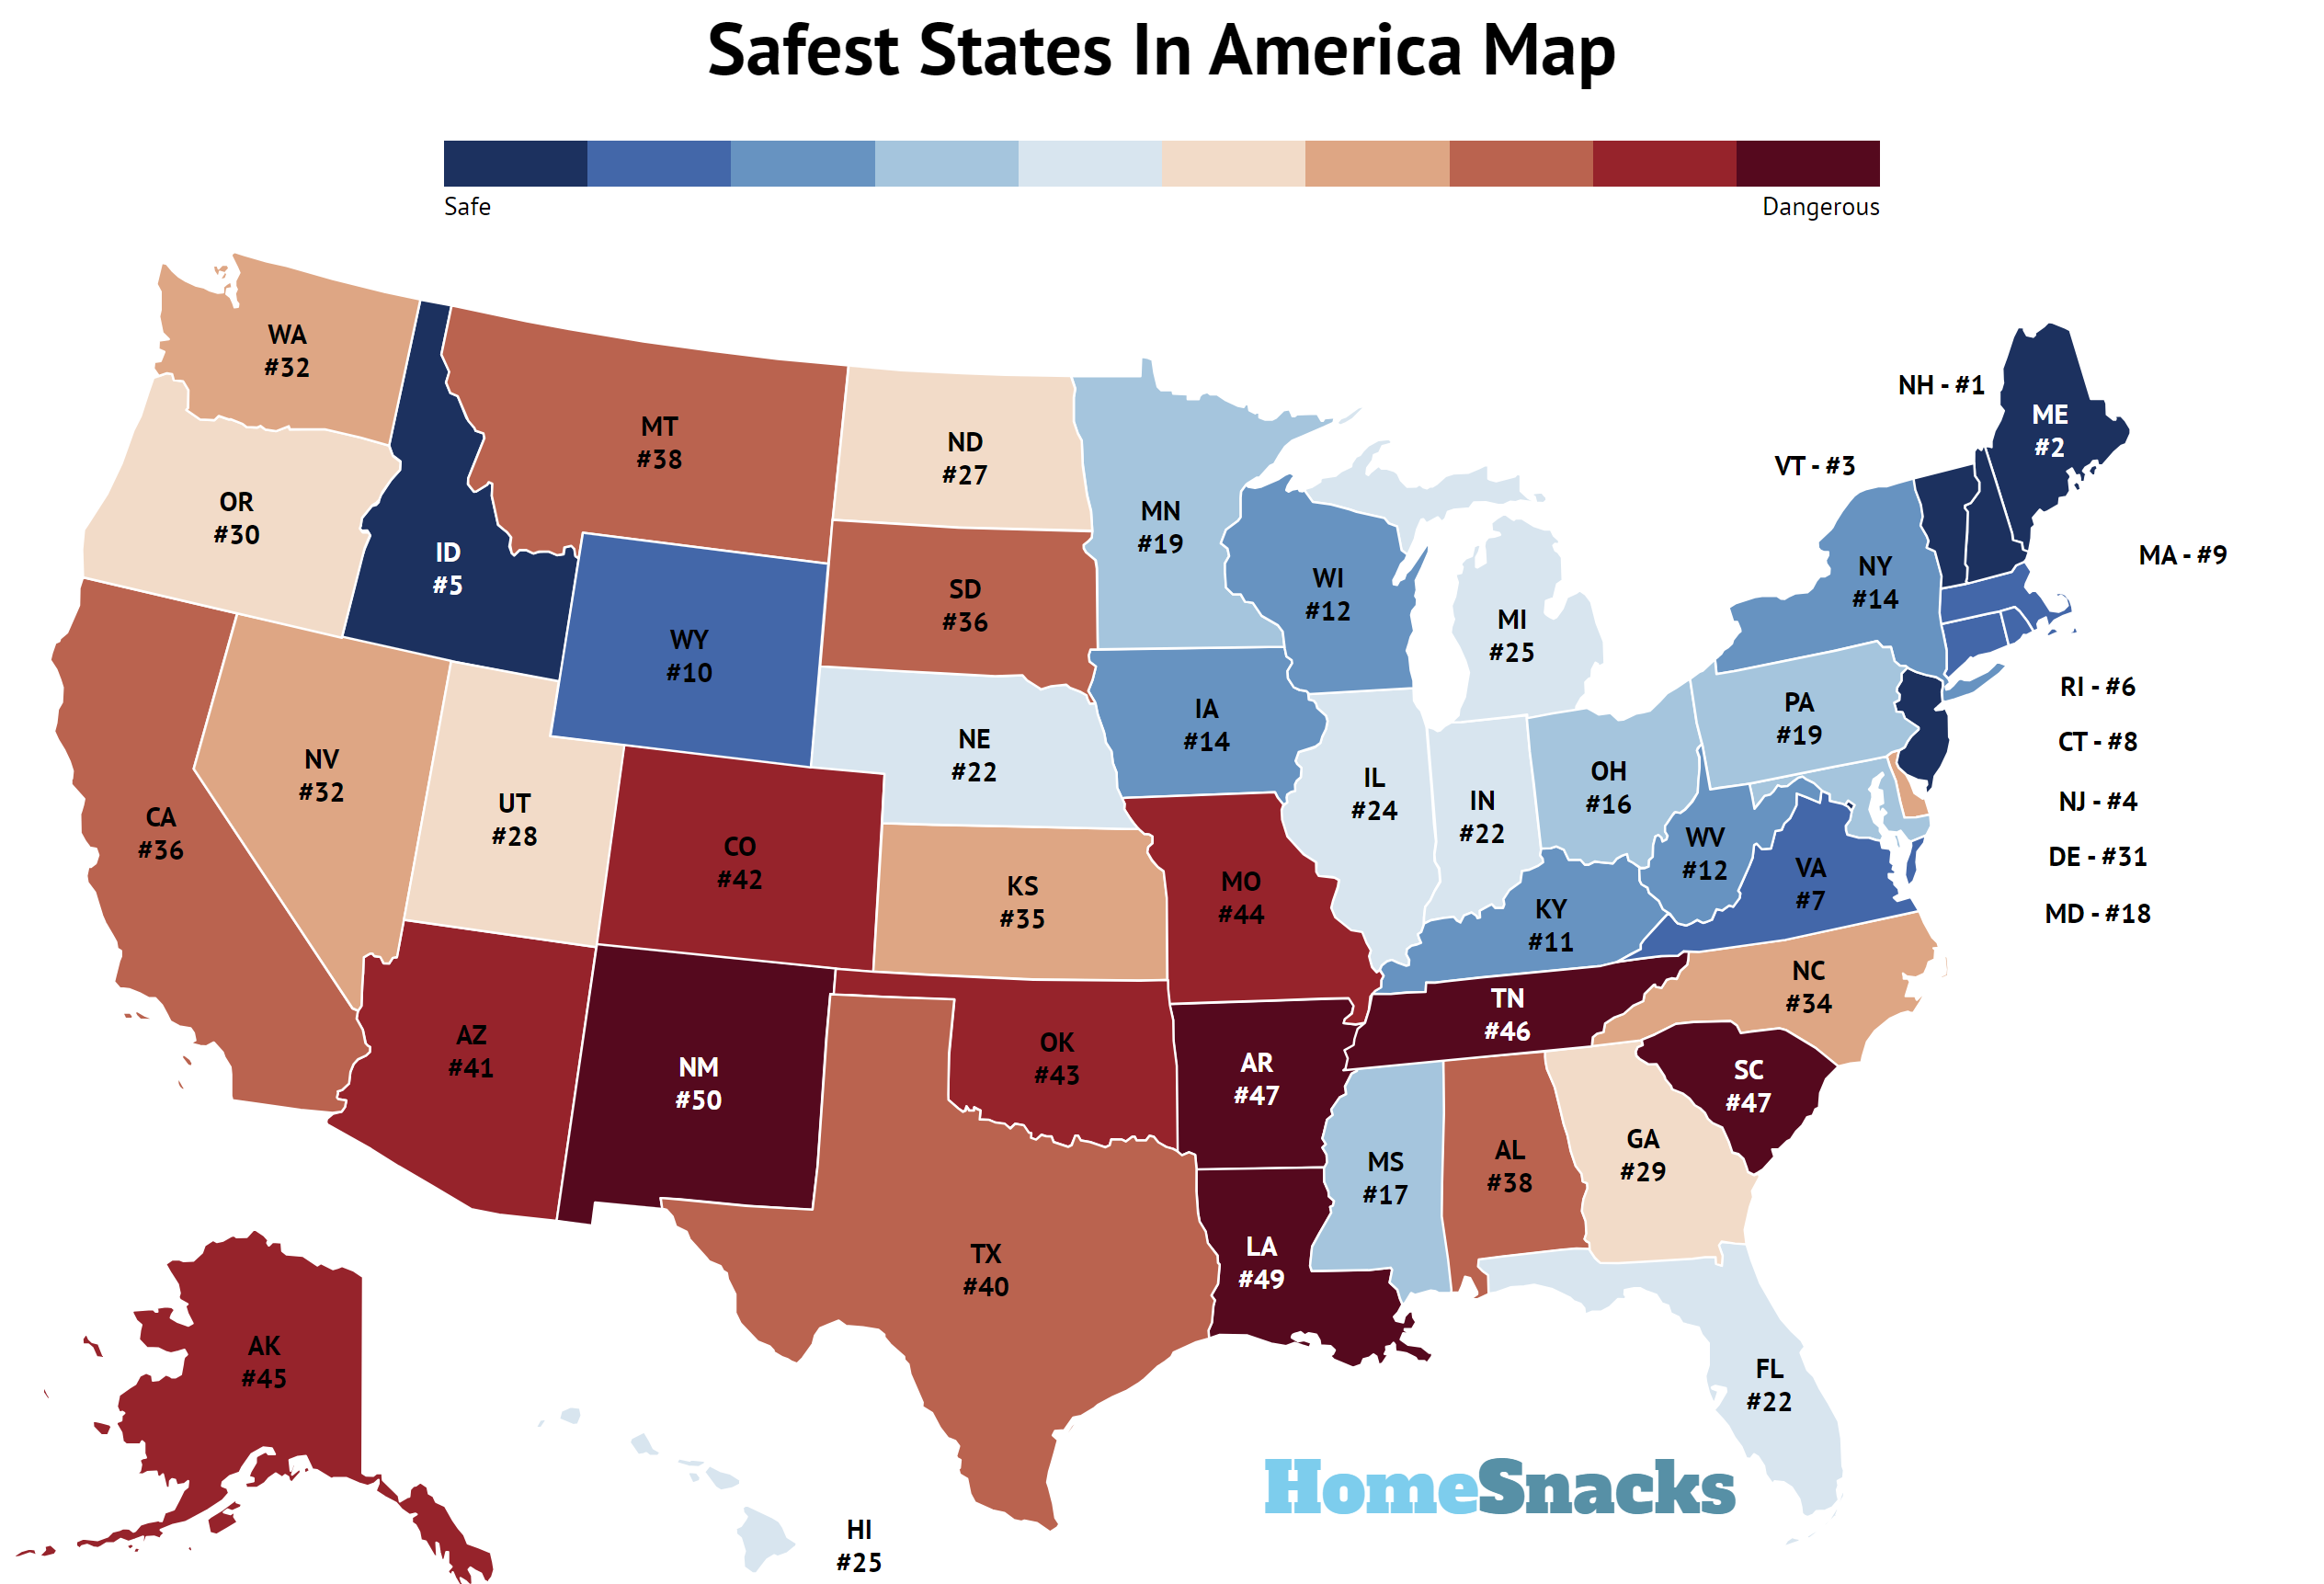 Which is the safest state in USA?